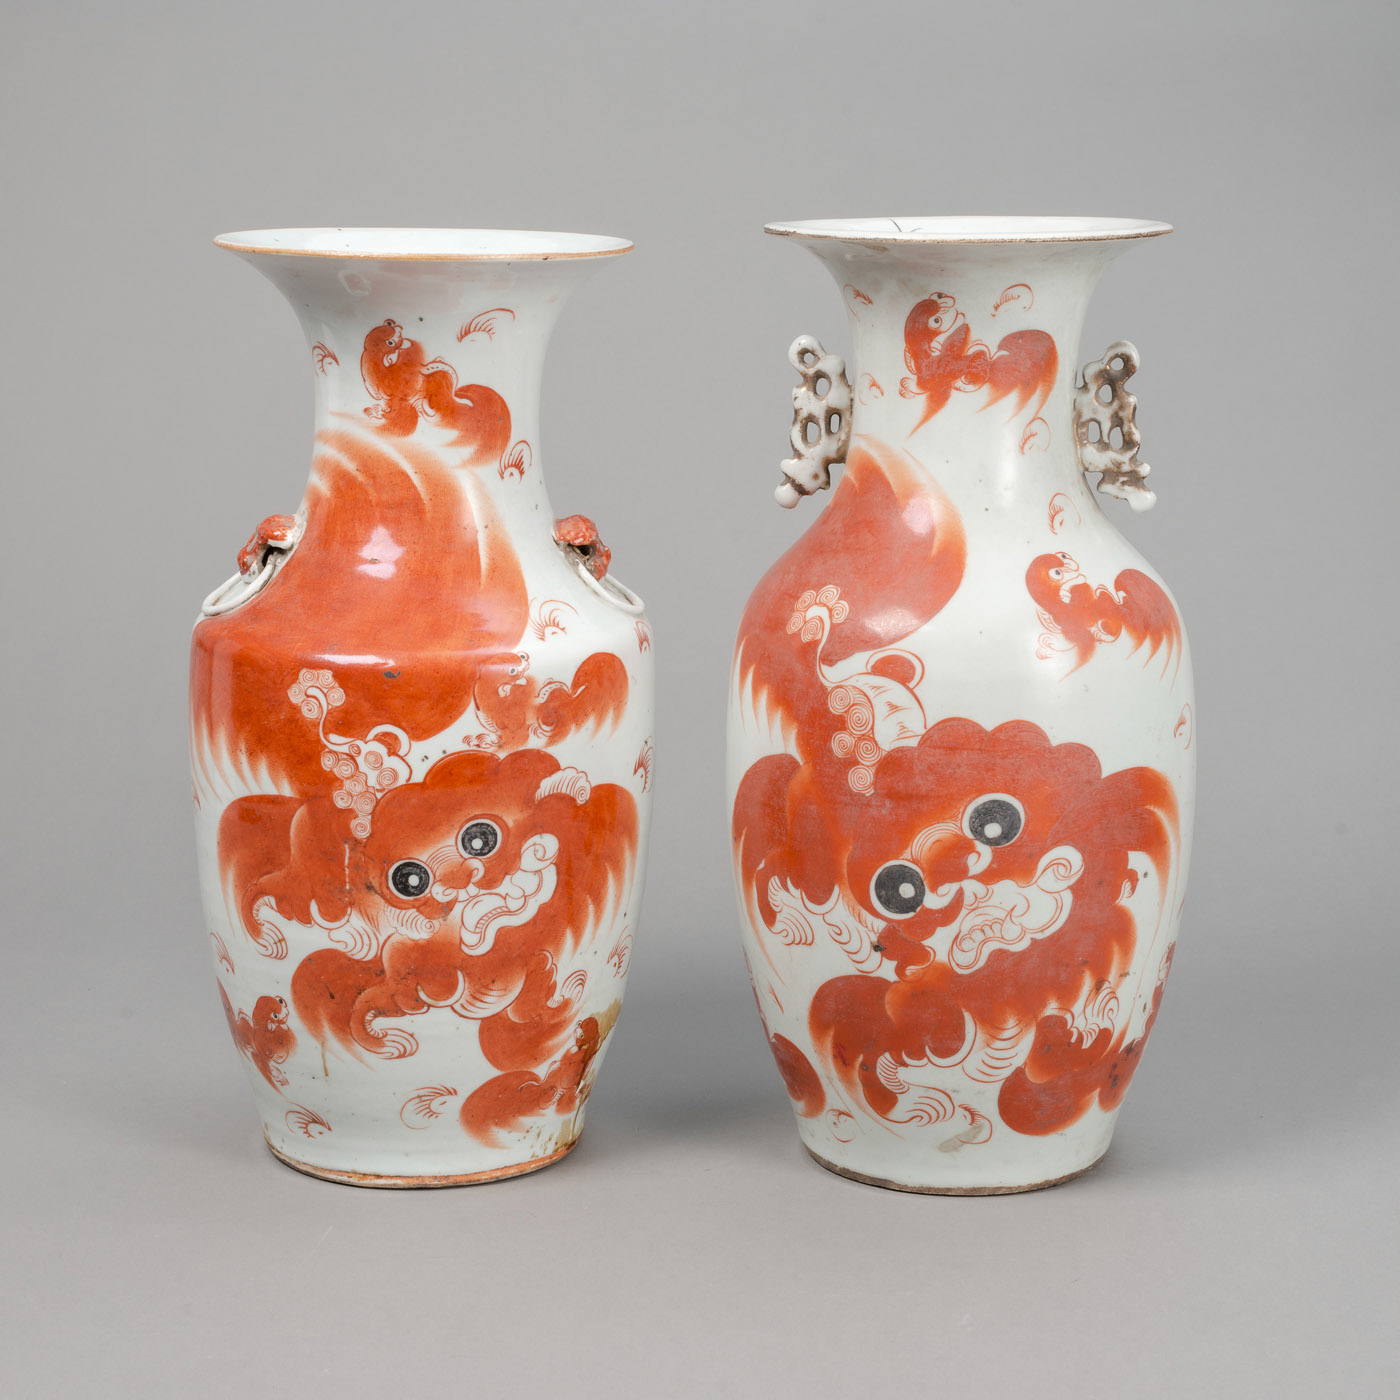 <b>TWO IRON-RED FO-LION PORCELAIN VASES</b>